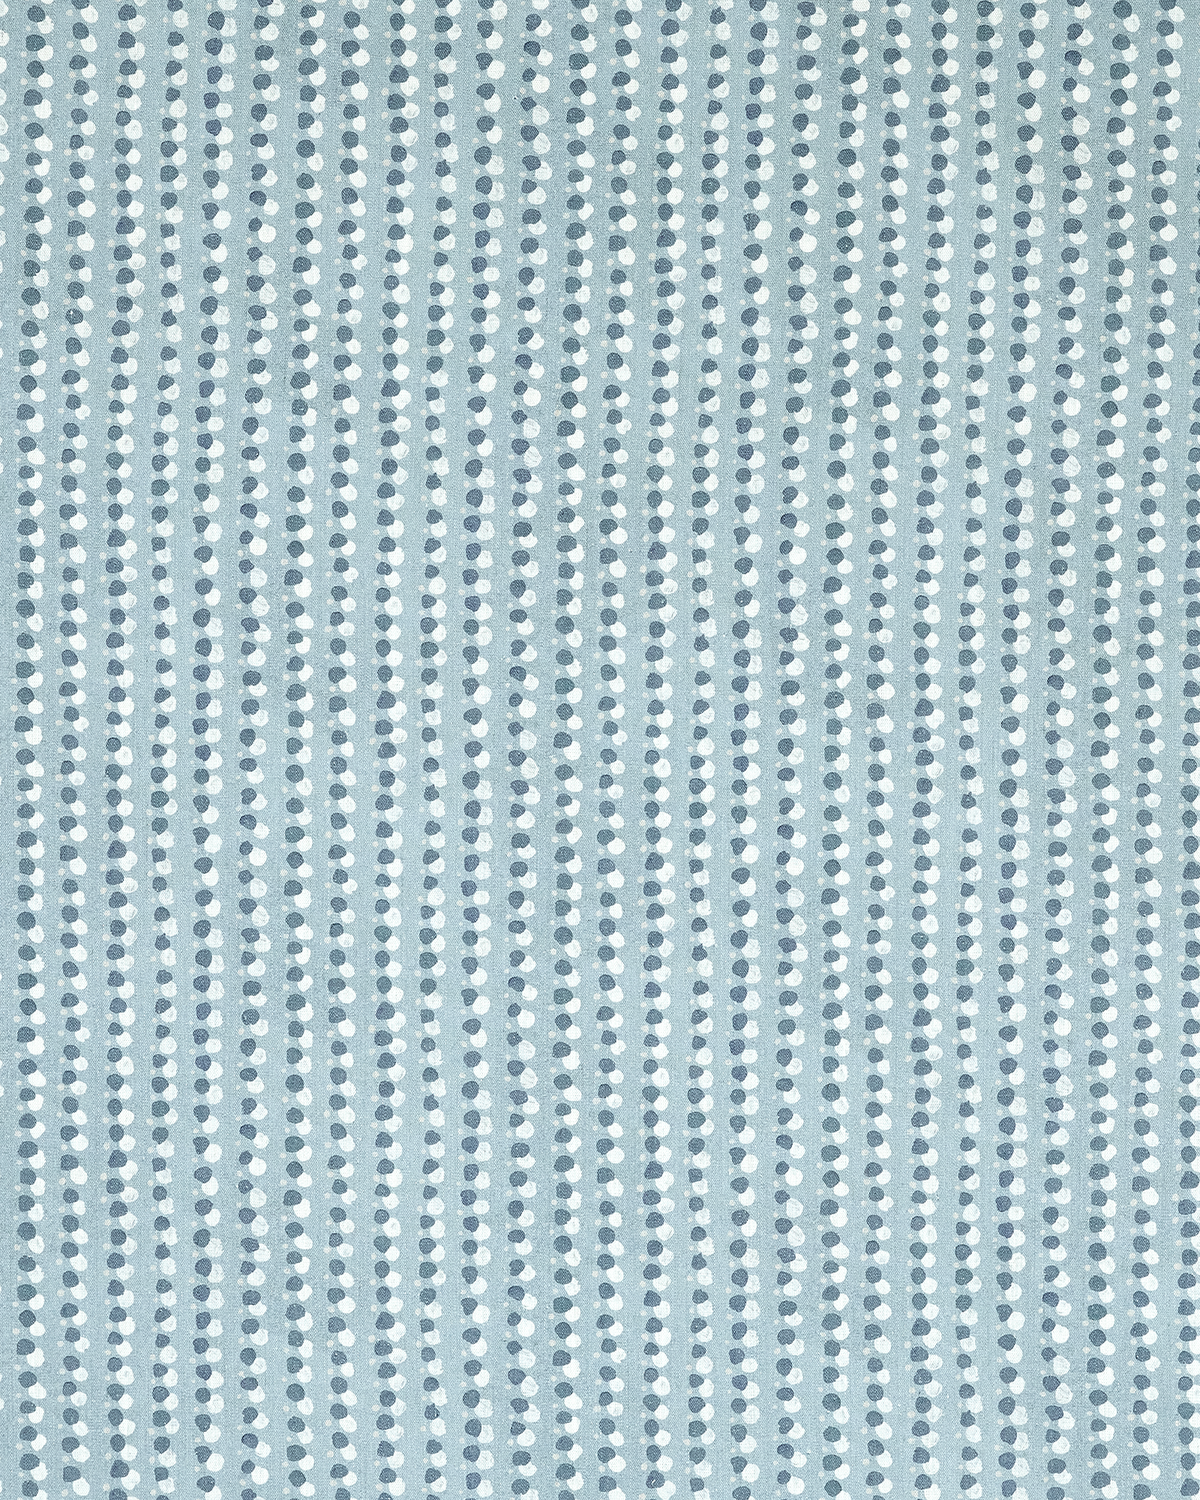 Dotted Lines Fabric in Light Blues